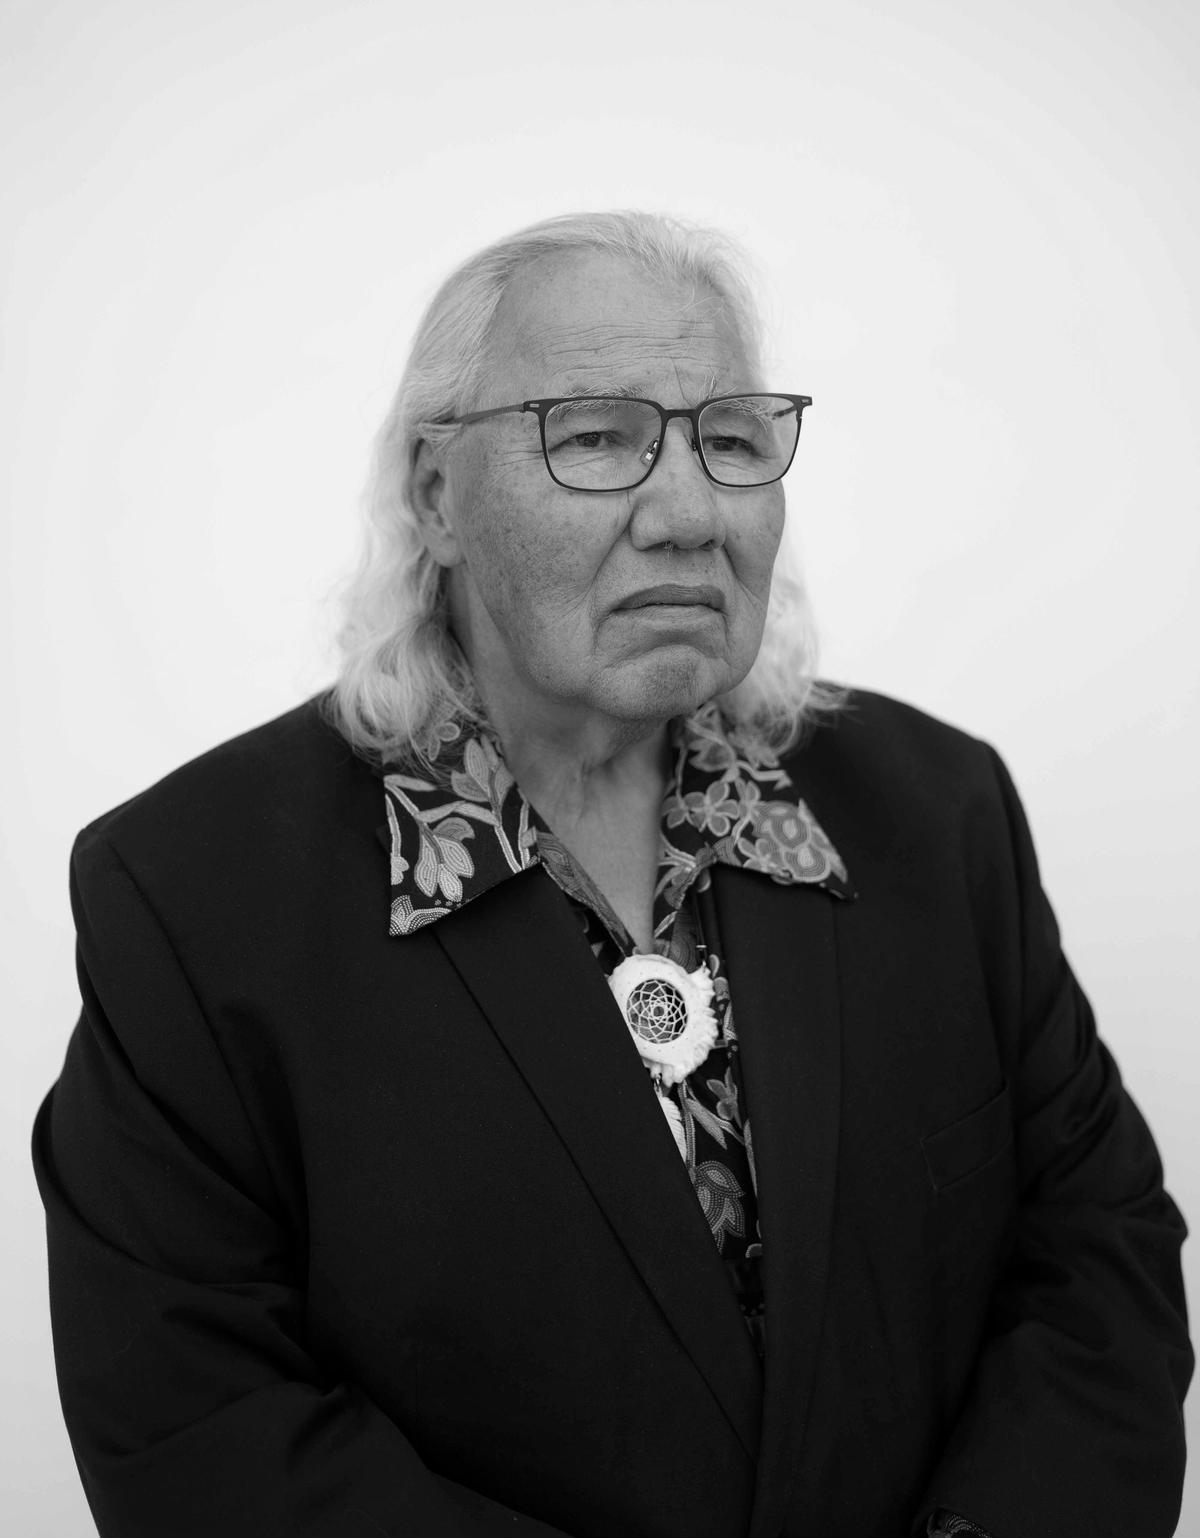 The honourable Murray Sinclair (Photograph by Skye Spence)Murray Sinclair (Photograph by Skye Spence)